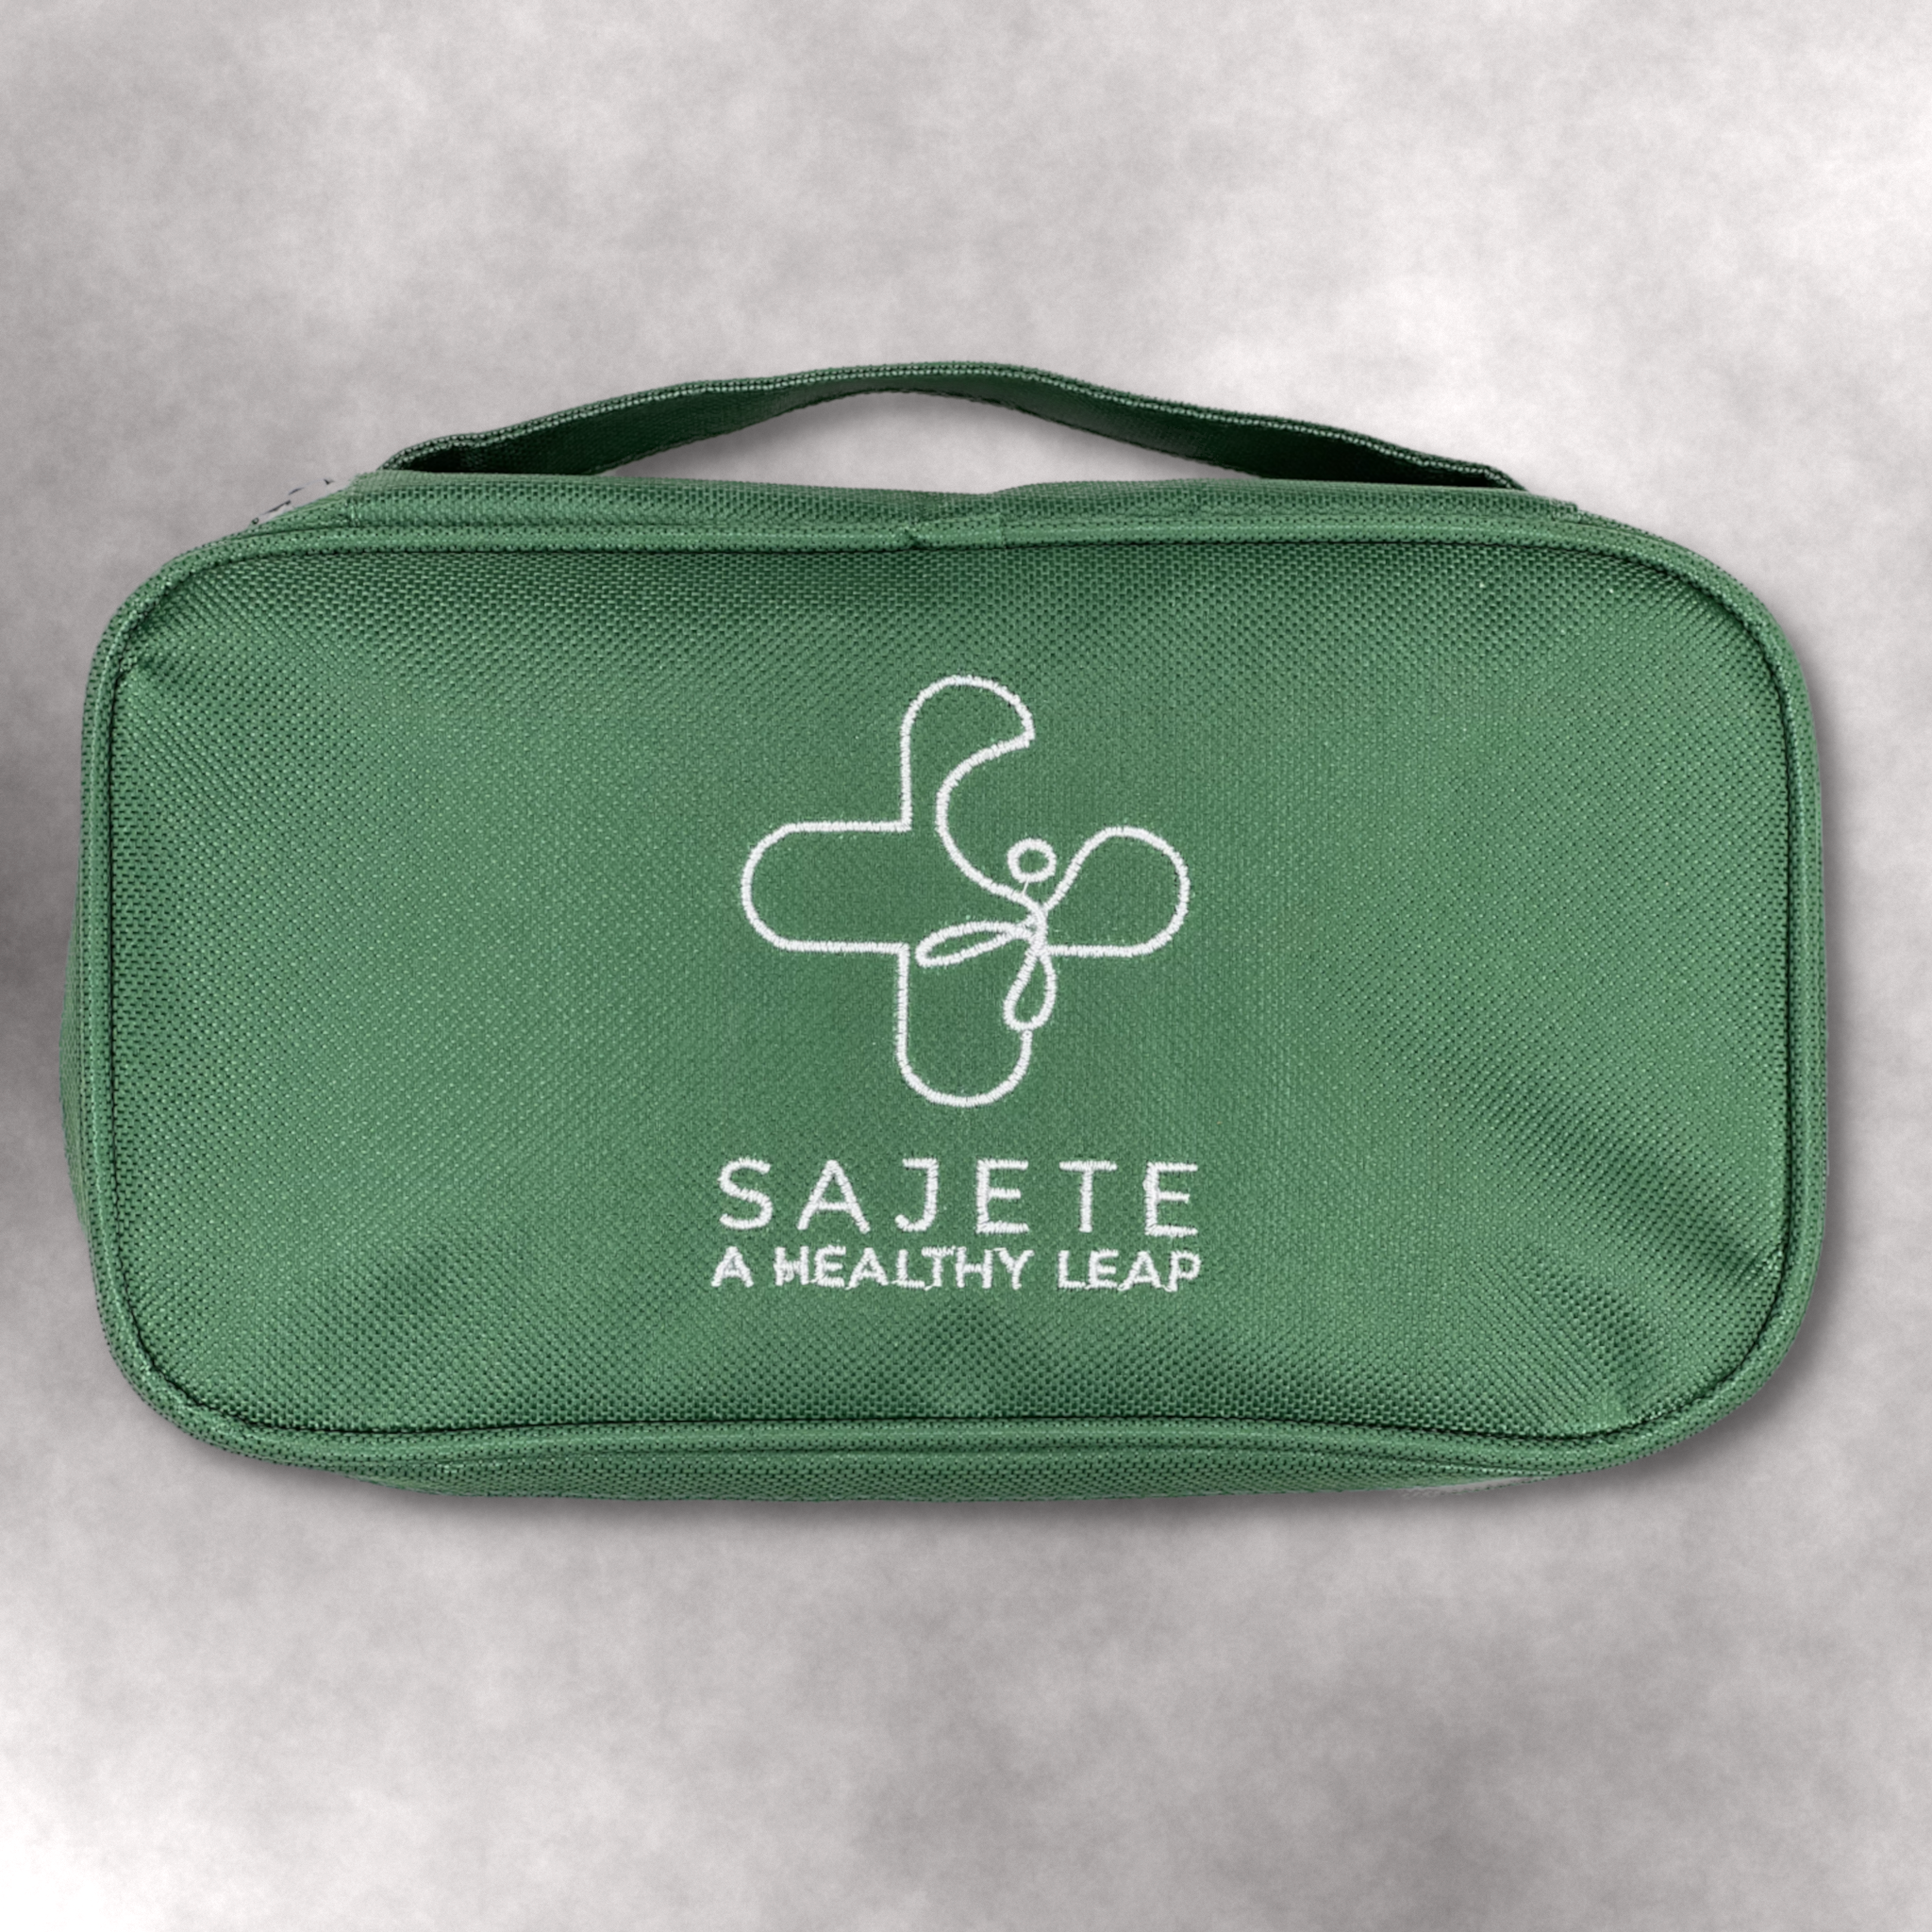 Our All-In-One Place Healthy Dancer Bag